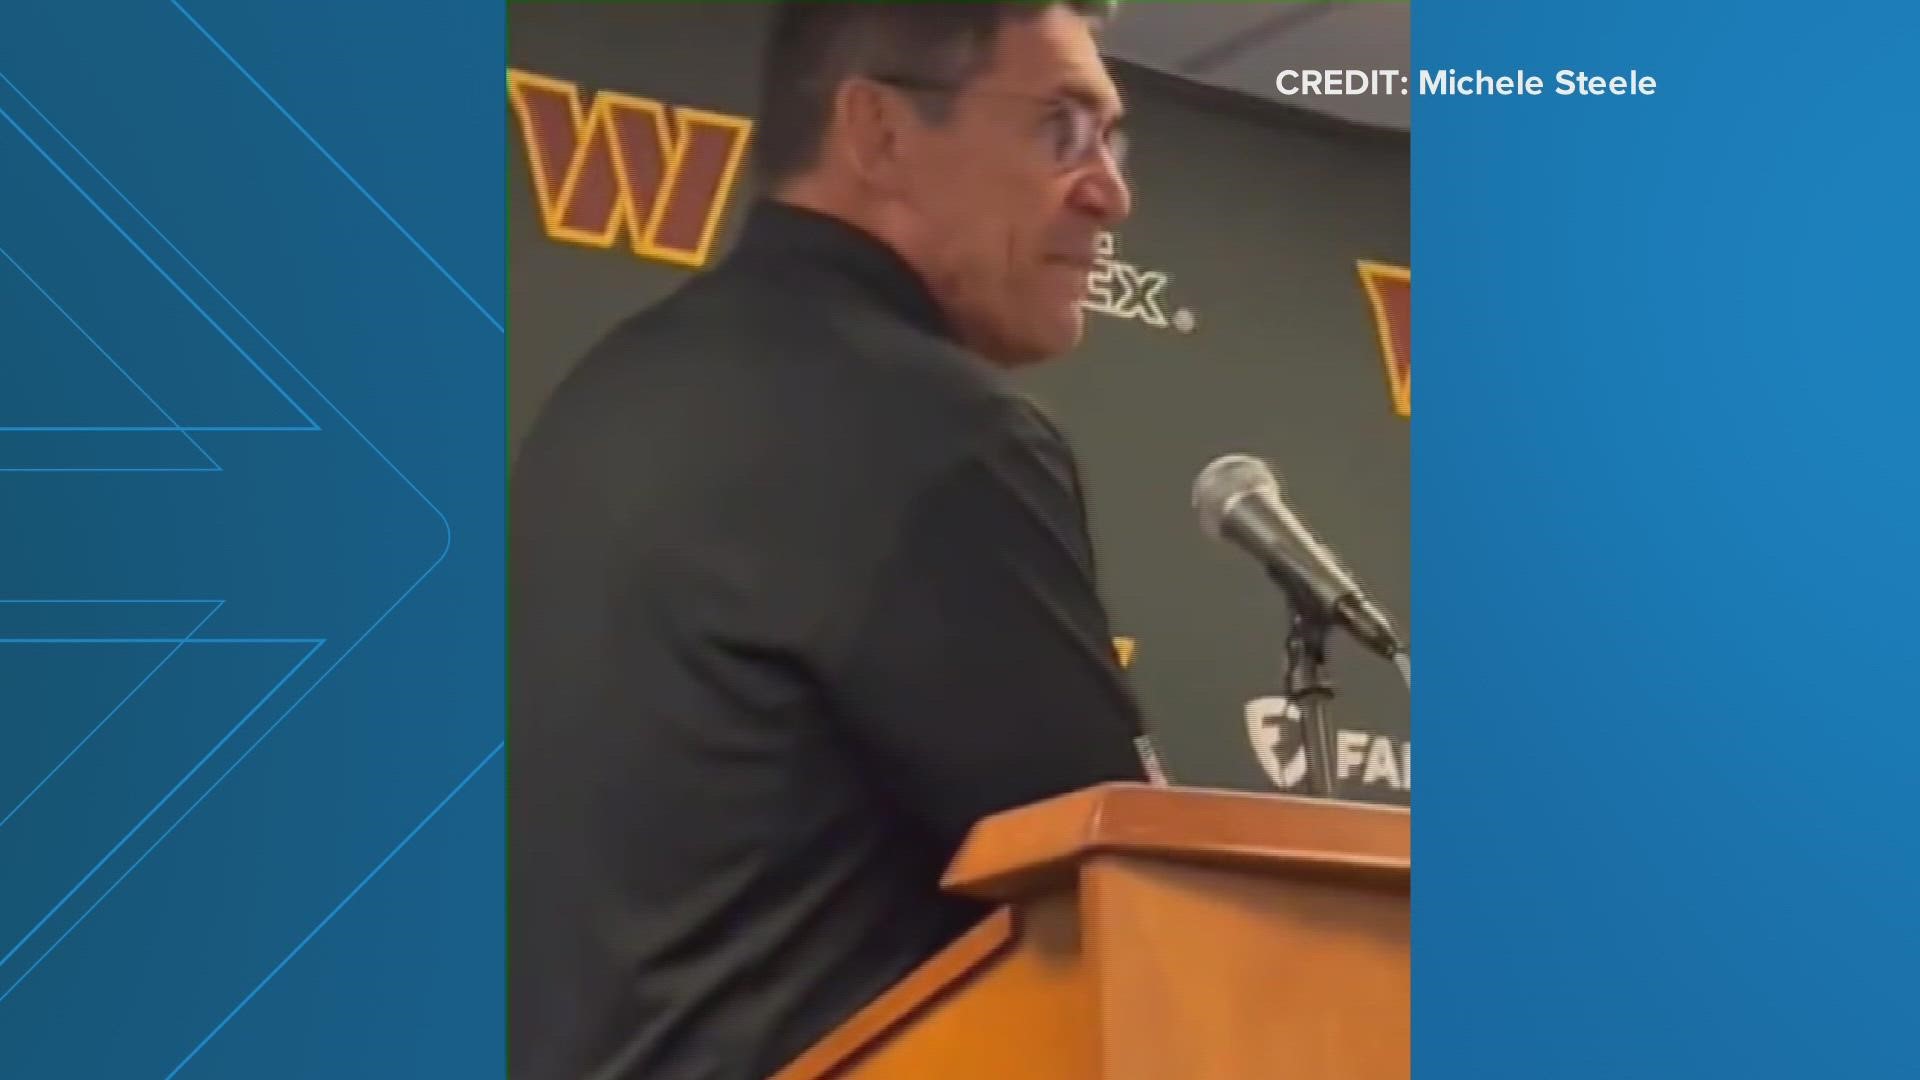 Despite a 12-7 win over the Bears, Ron Rivera angrily left the post-game presser when questions turned to off-field behavior (Video: Courtesy Michele Steele).